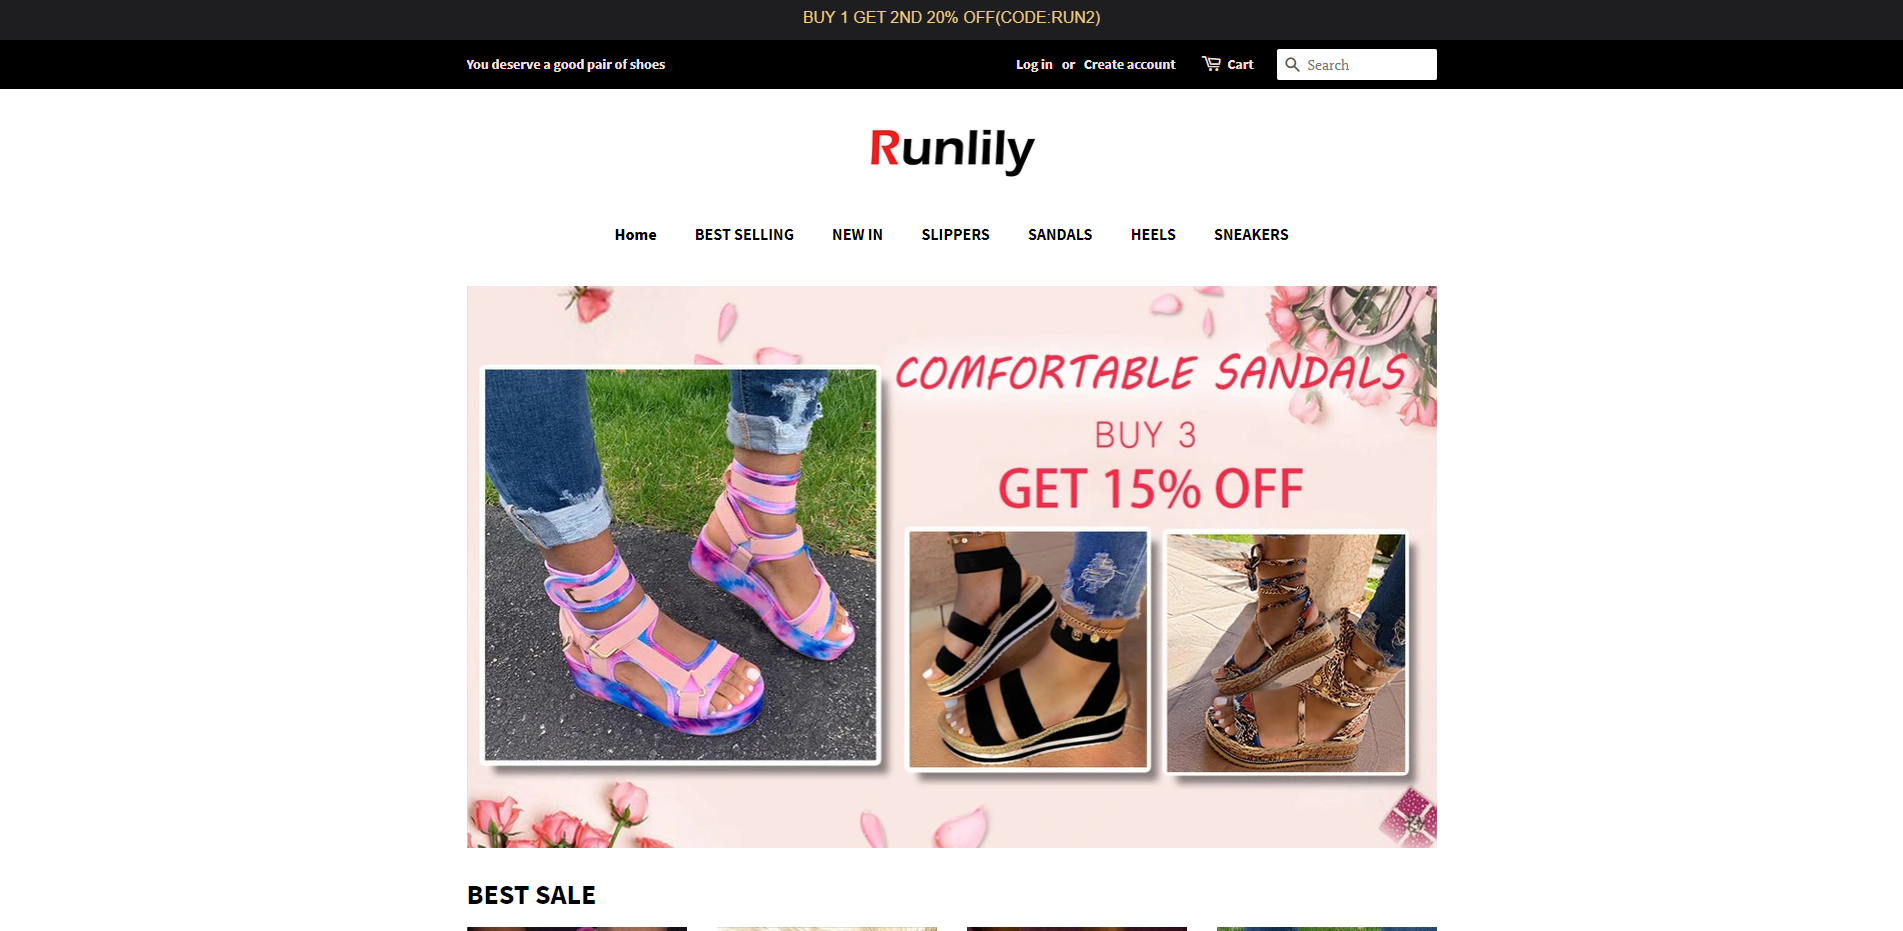 runlily scam home page